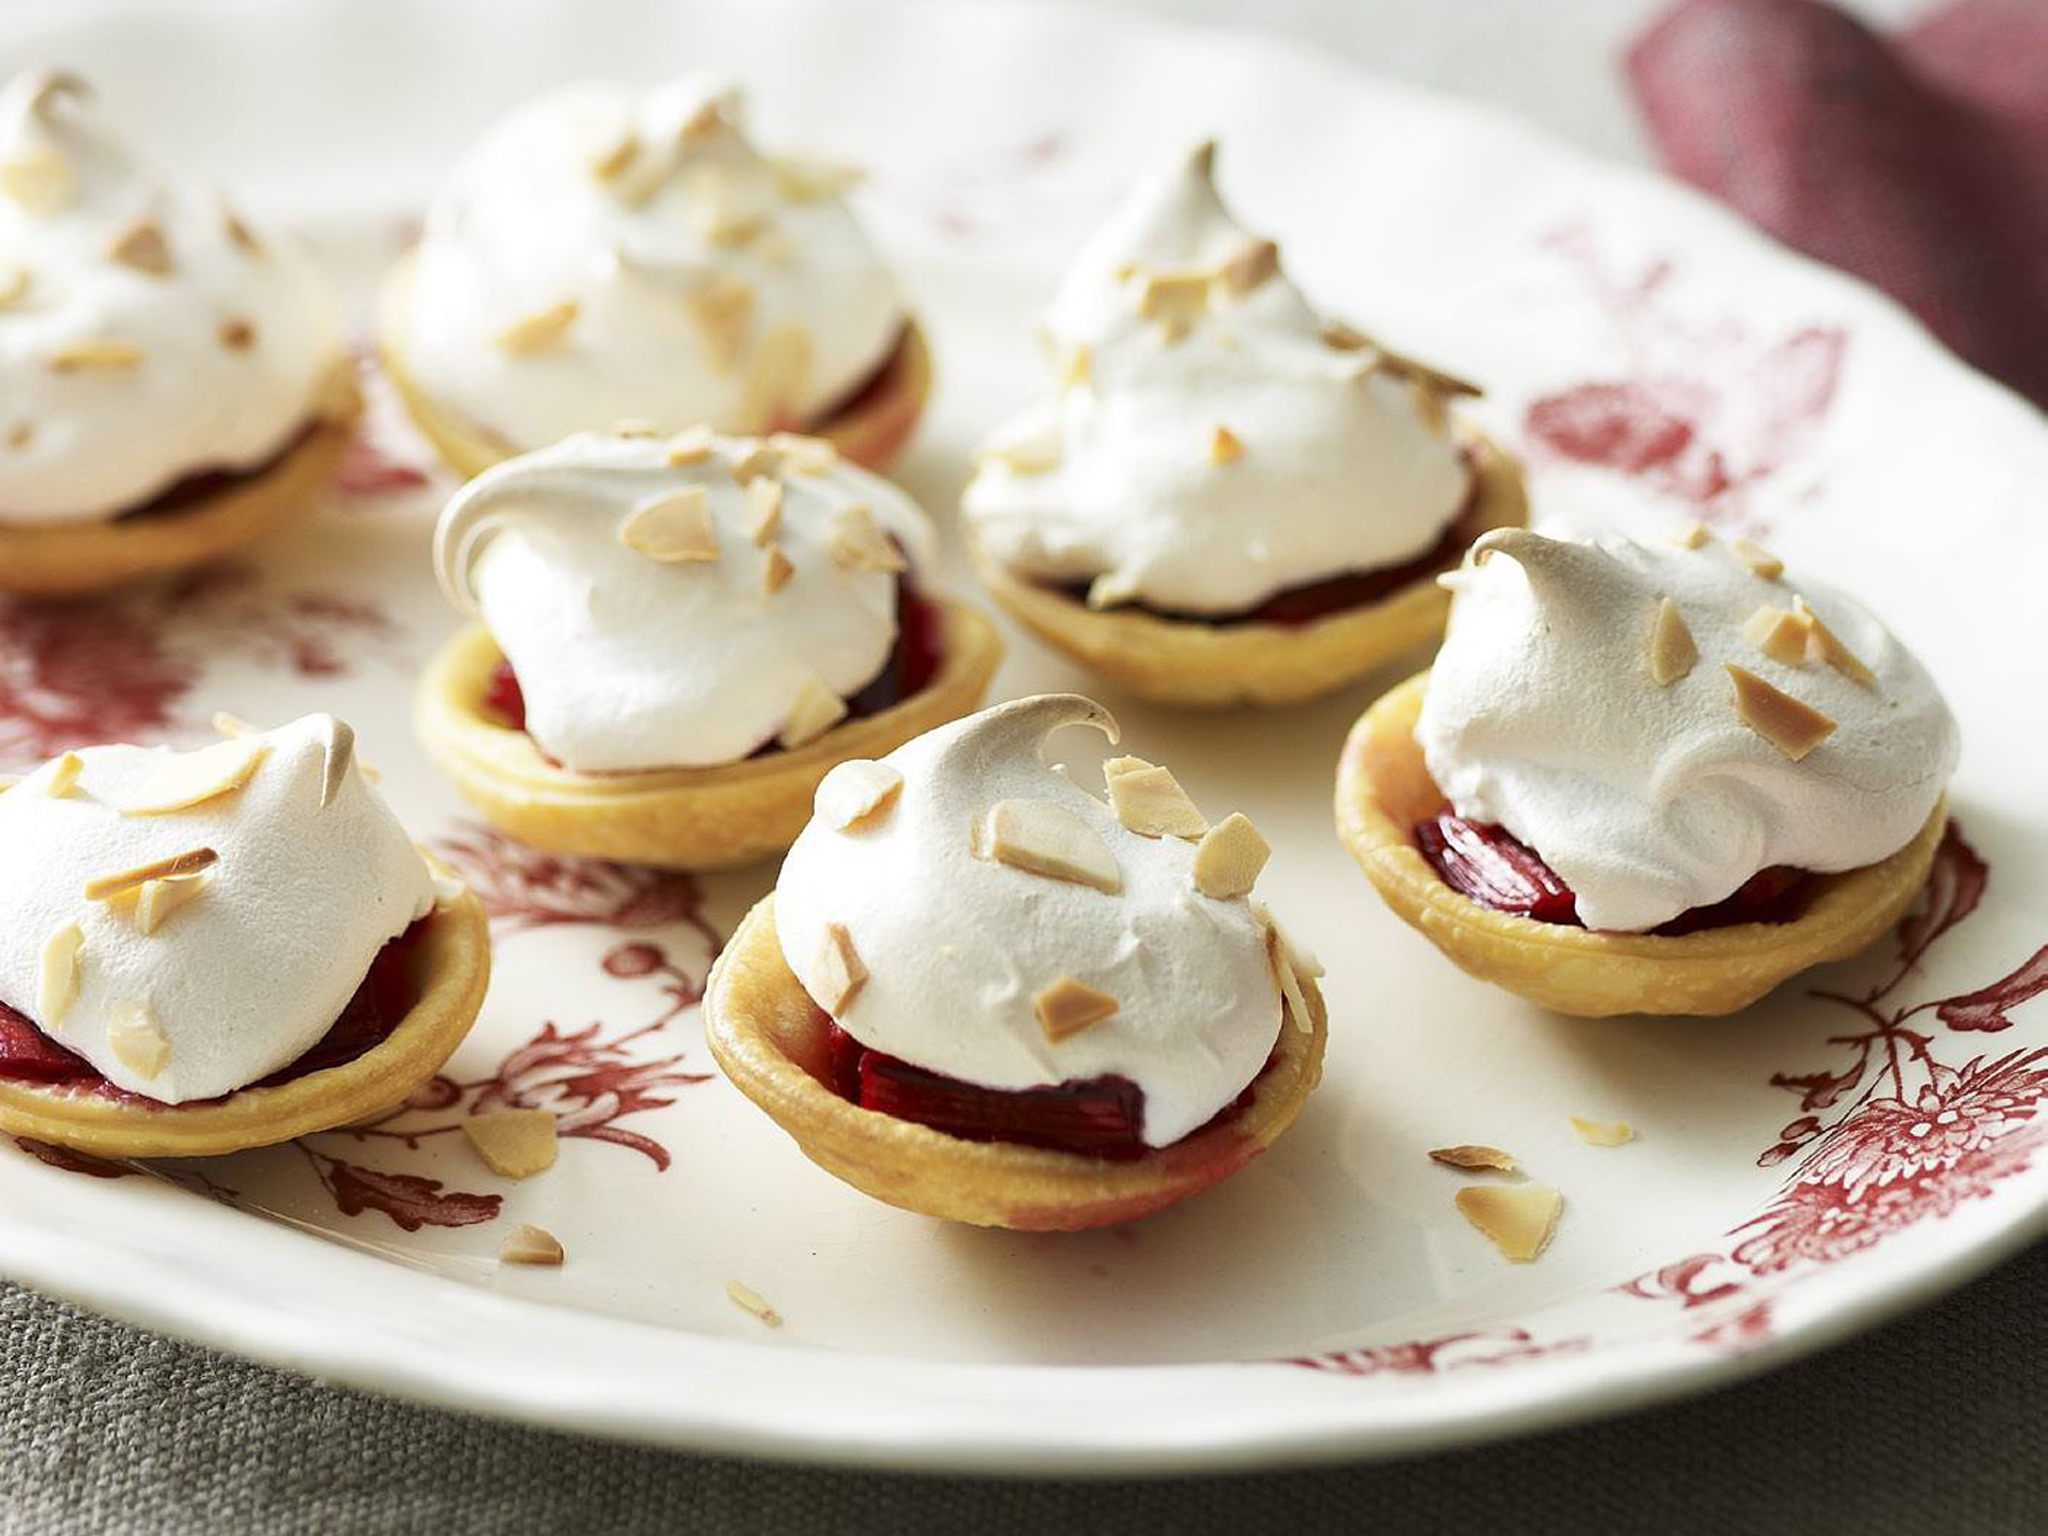 RHUBARB PIES WITH MERINGUE TOPPING